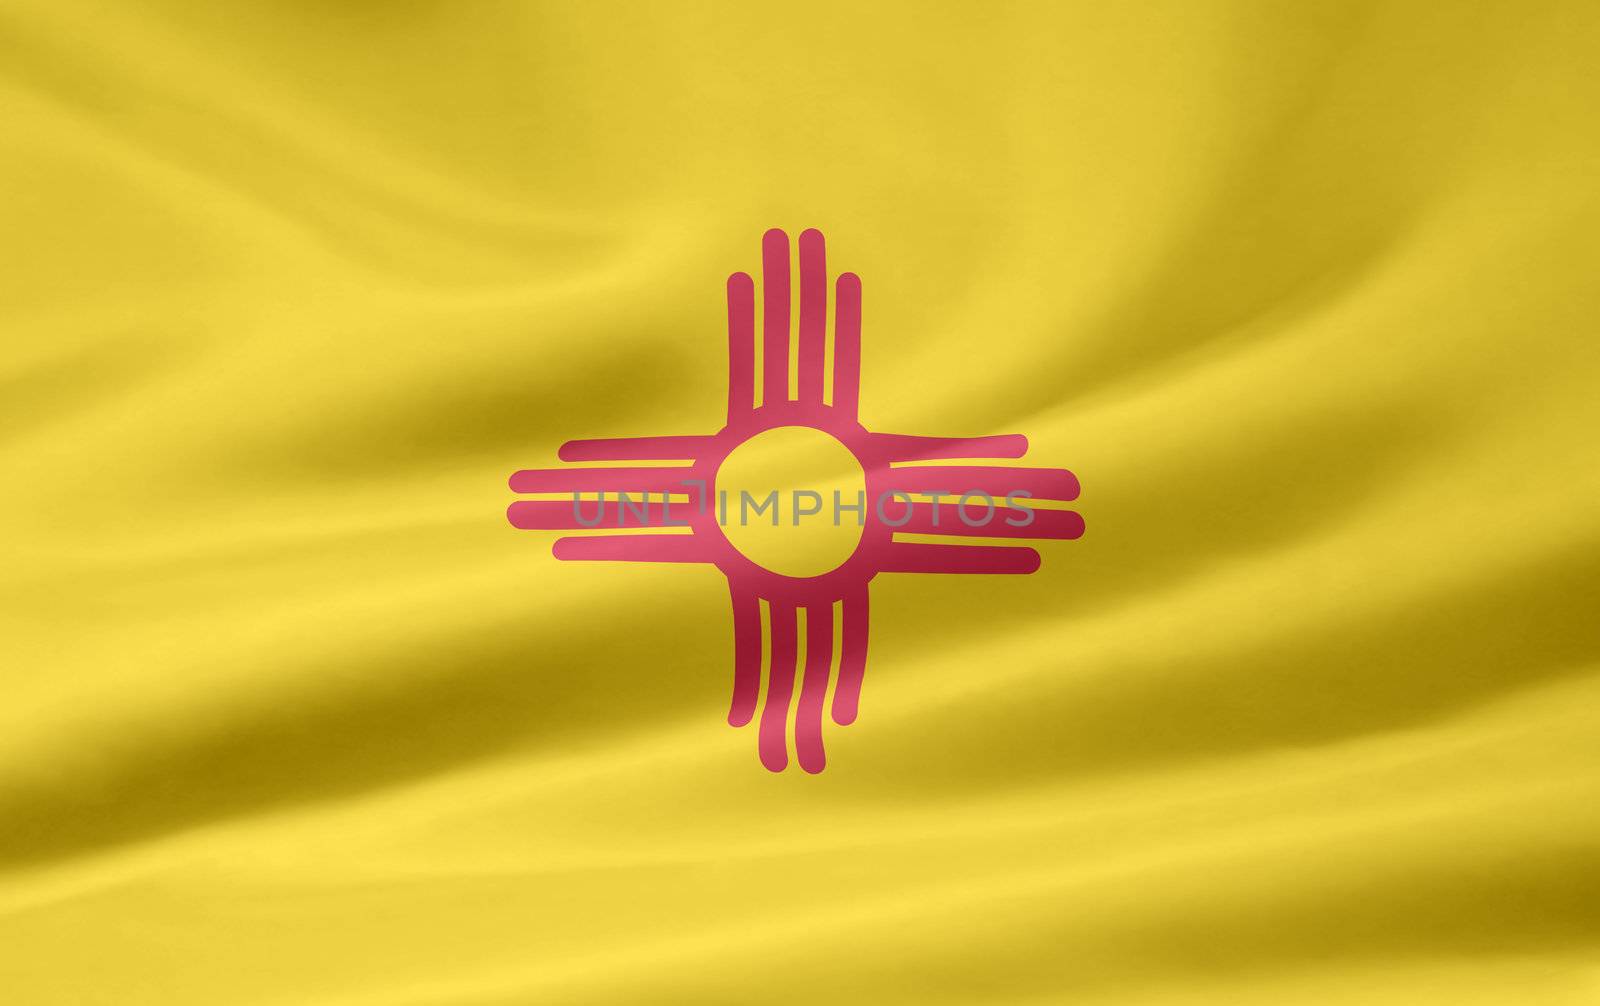 Flag of New Mexico by joggi2002